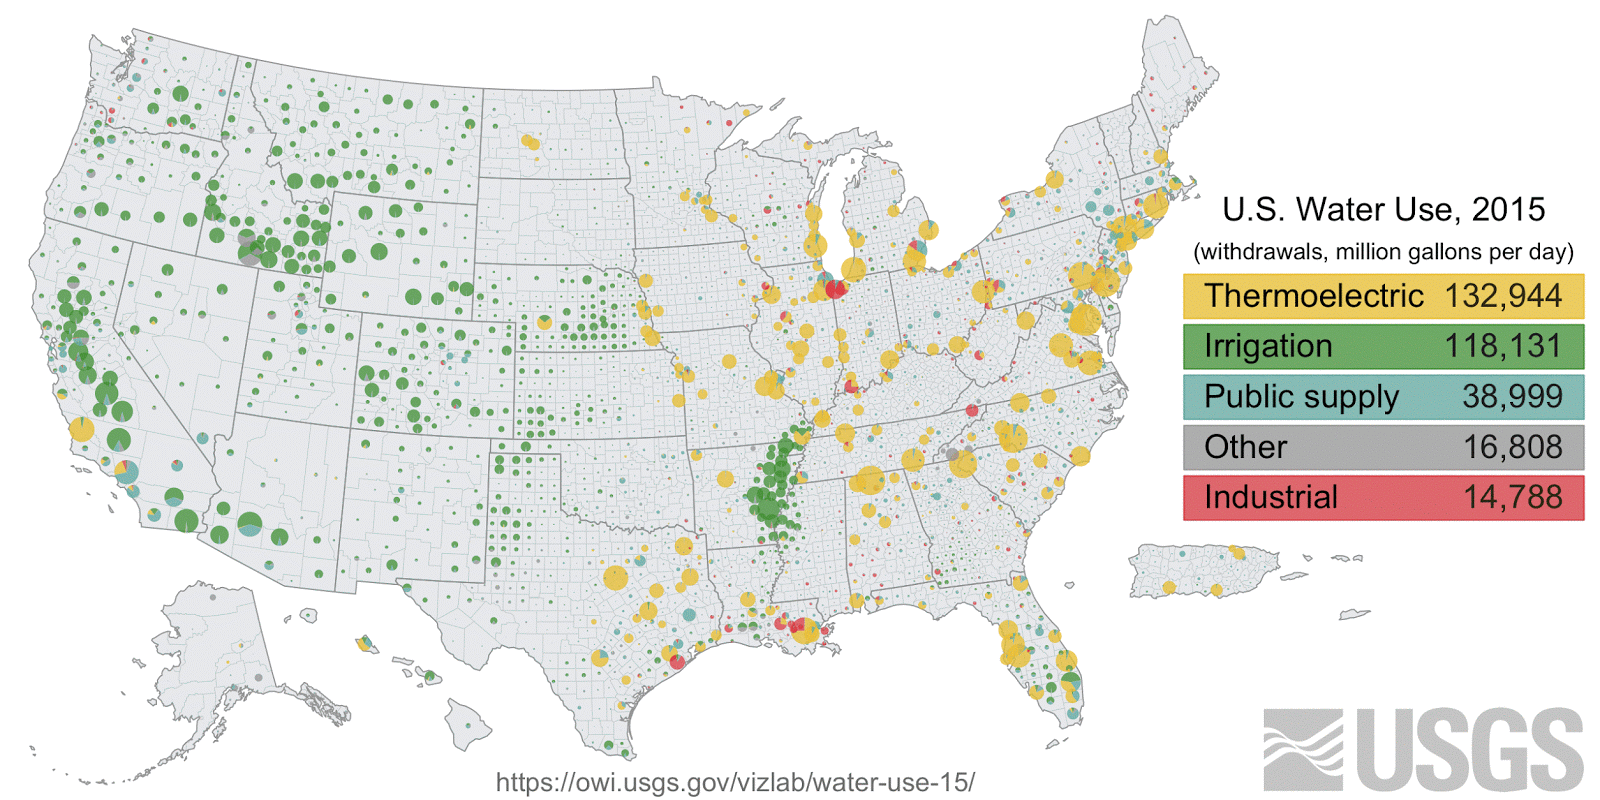 What's your U.S. county's water use? Regional patterns in U.S. water withdrawals